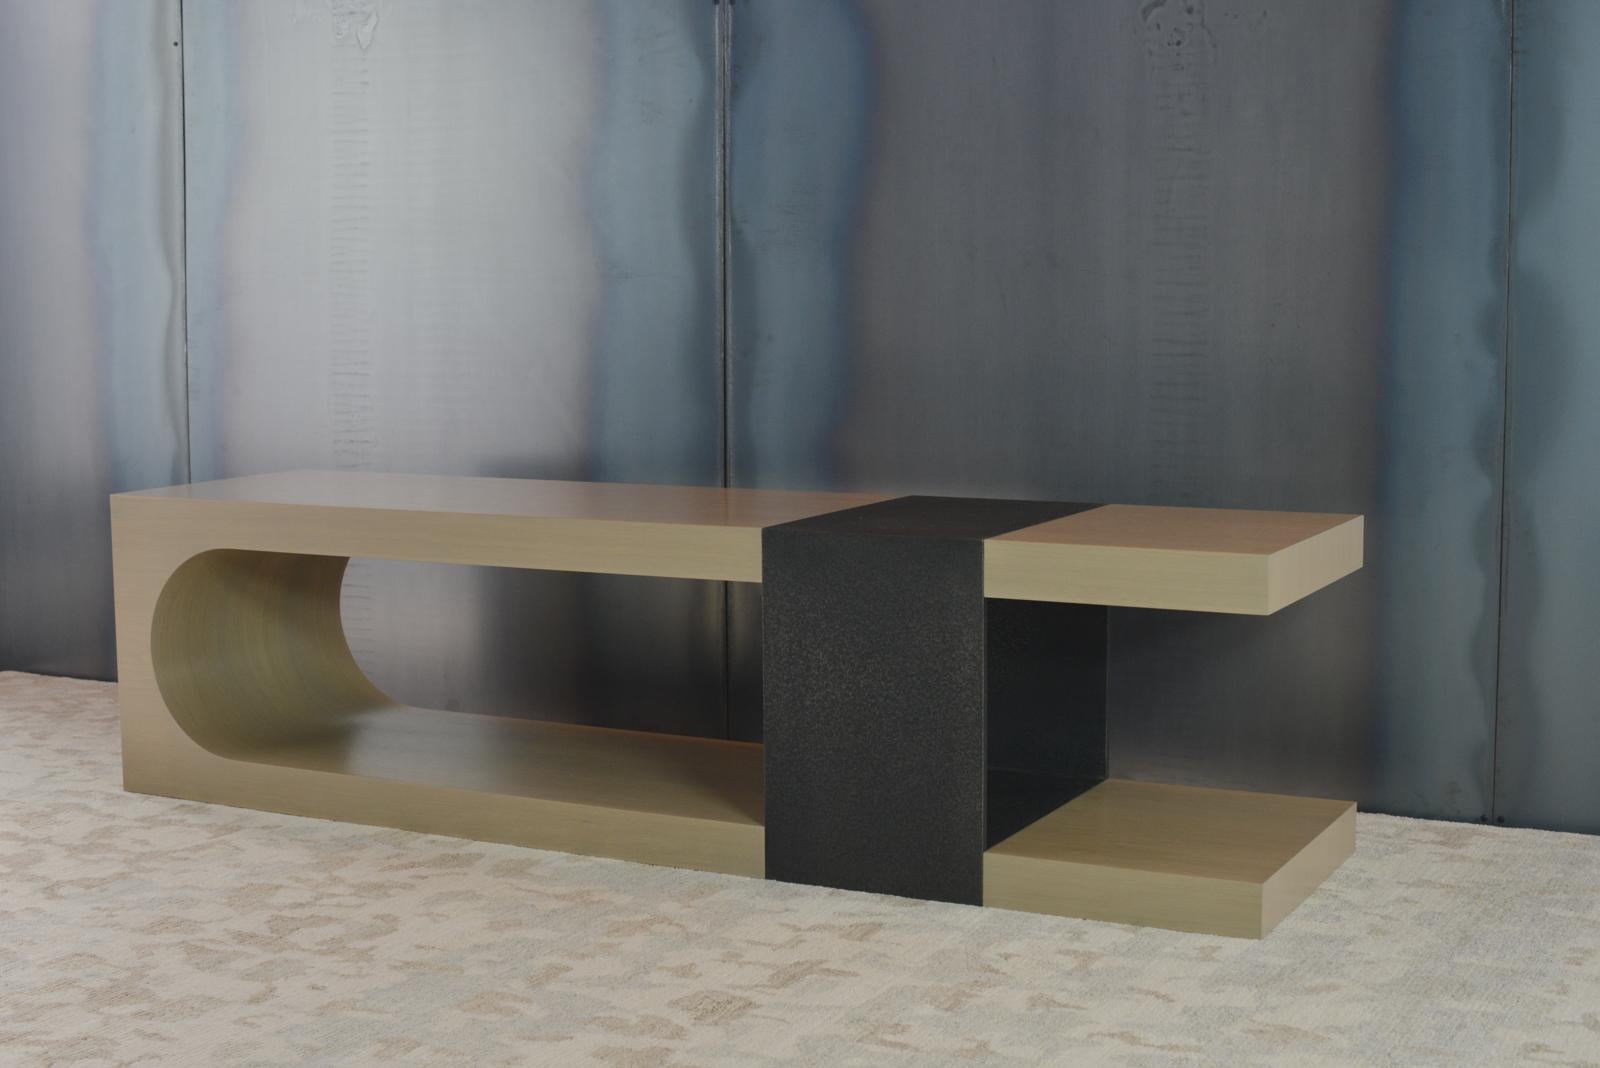 The LUMA design workshop silo bench is the result of thoughtful design and expert craftsmanship. The wooden body of the bench has a Rye finish. The metal strap is in our blackened quartz finish, which has a tight, consistent texturing.

Like all